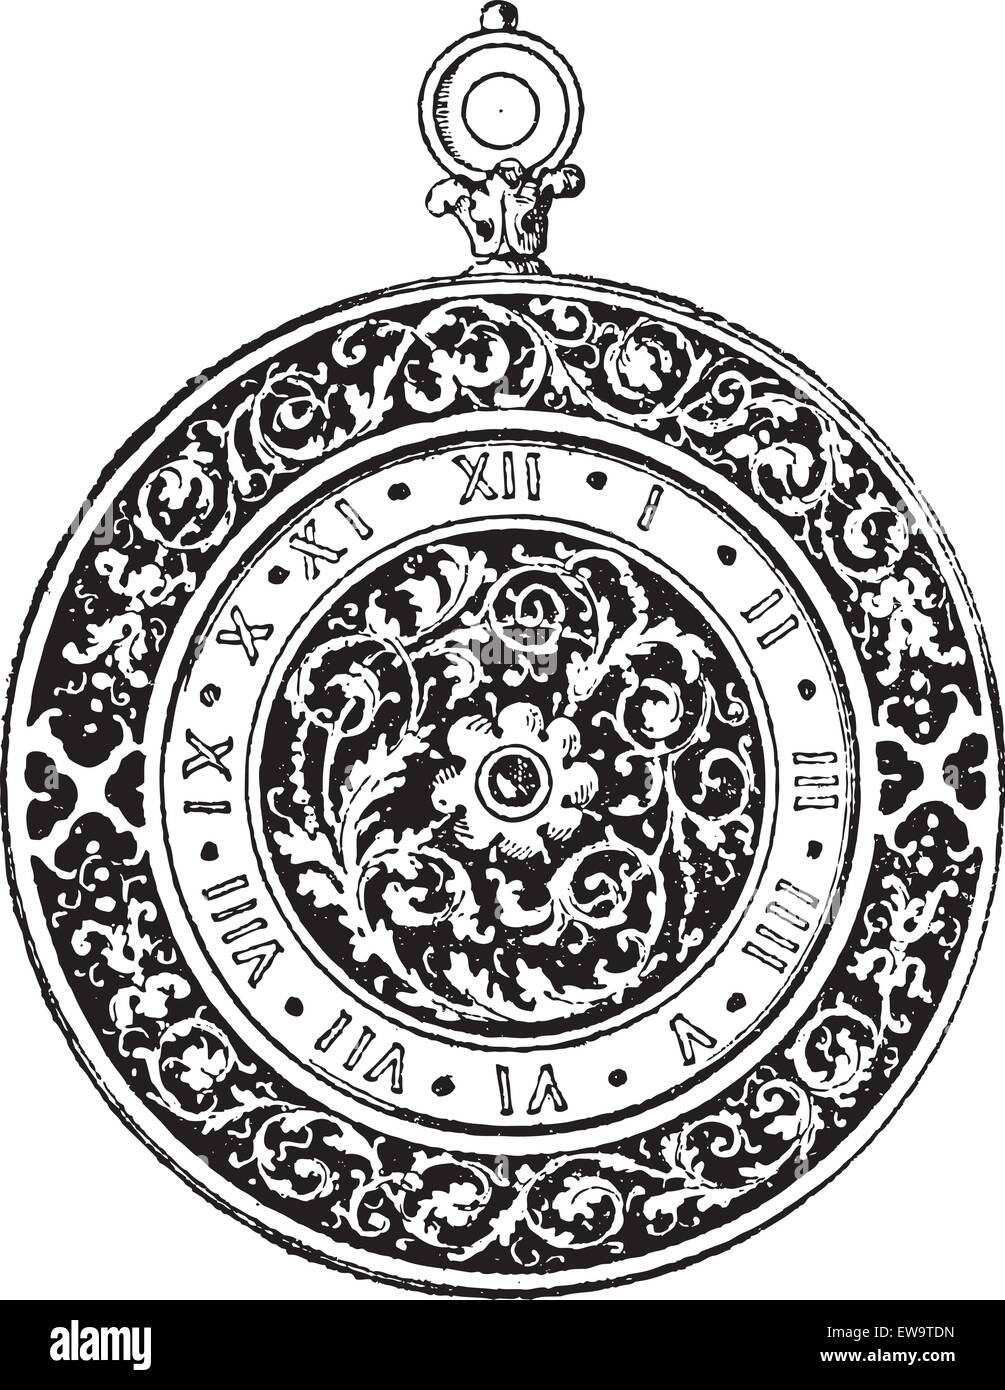 Watch Dial, German-made, during the 16th century, vintage engraved illustration. Dictionary of Words and Things - Larive and Fleury - 1895 Stock Vector